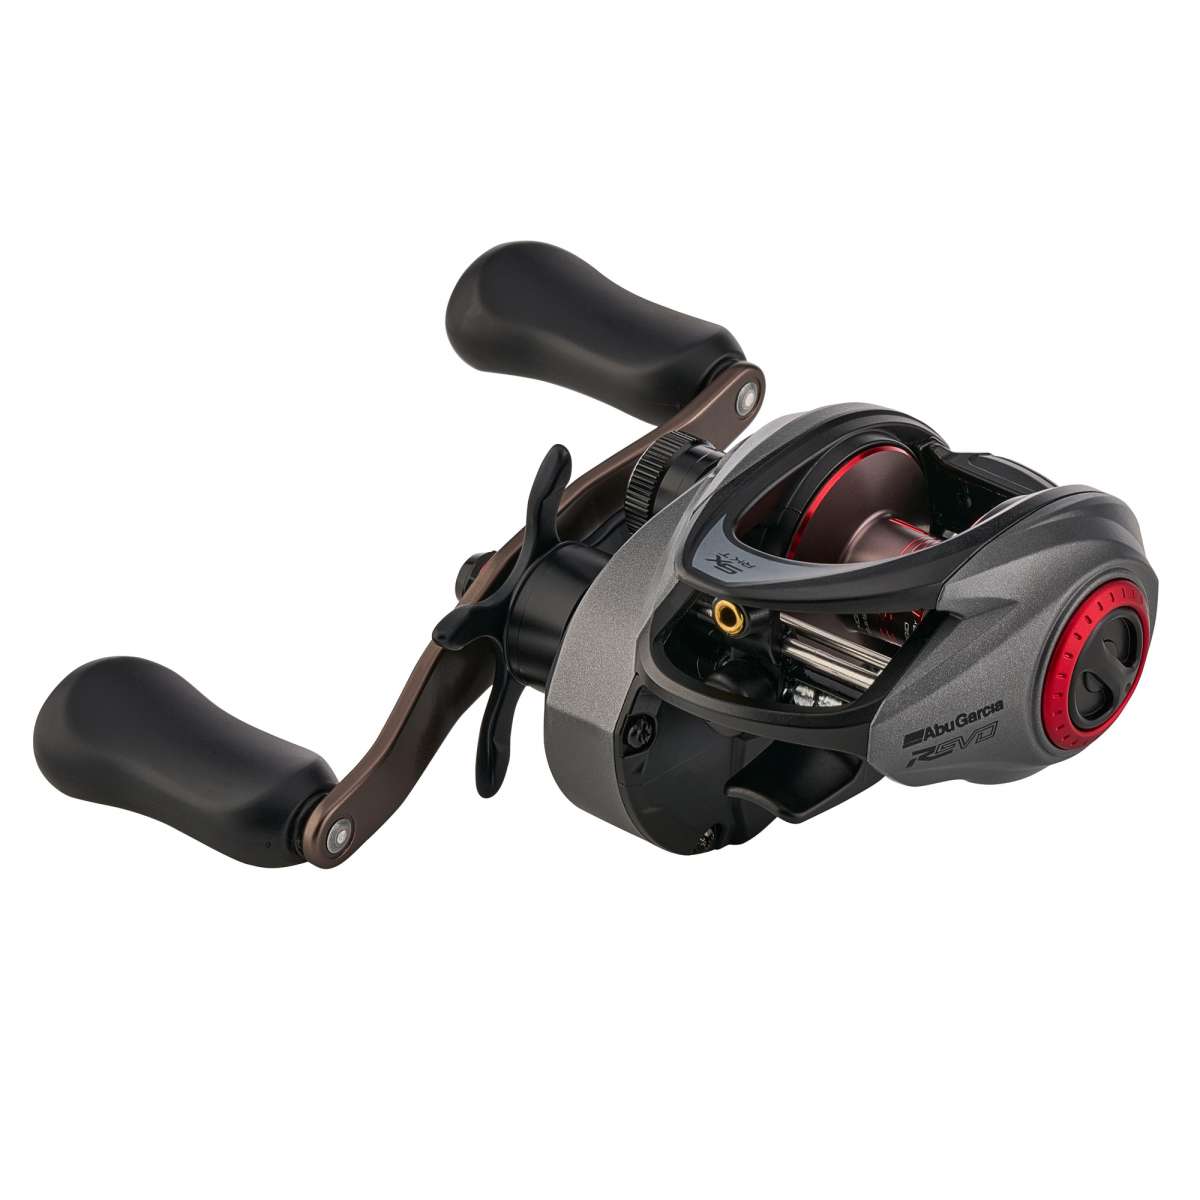 Abu Garcia Baitcast Reel Replacement Parts by Model